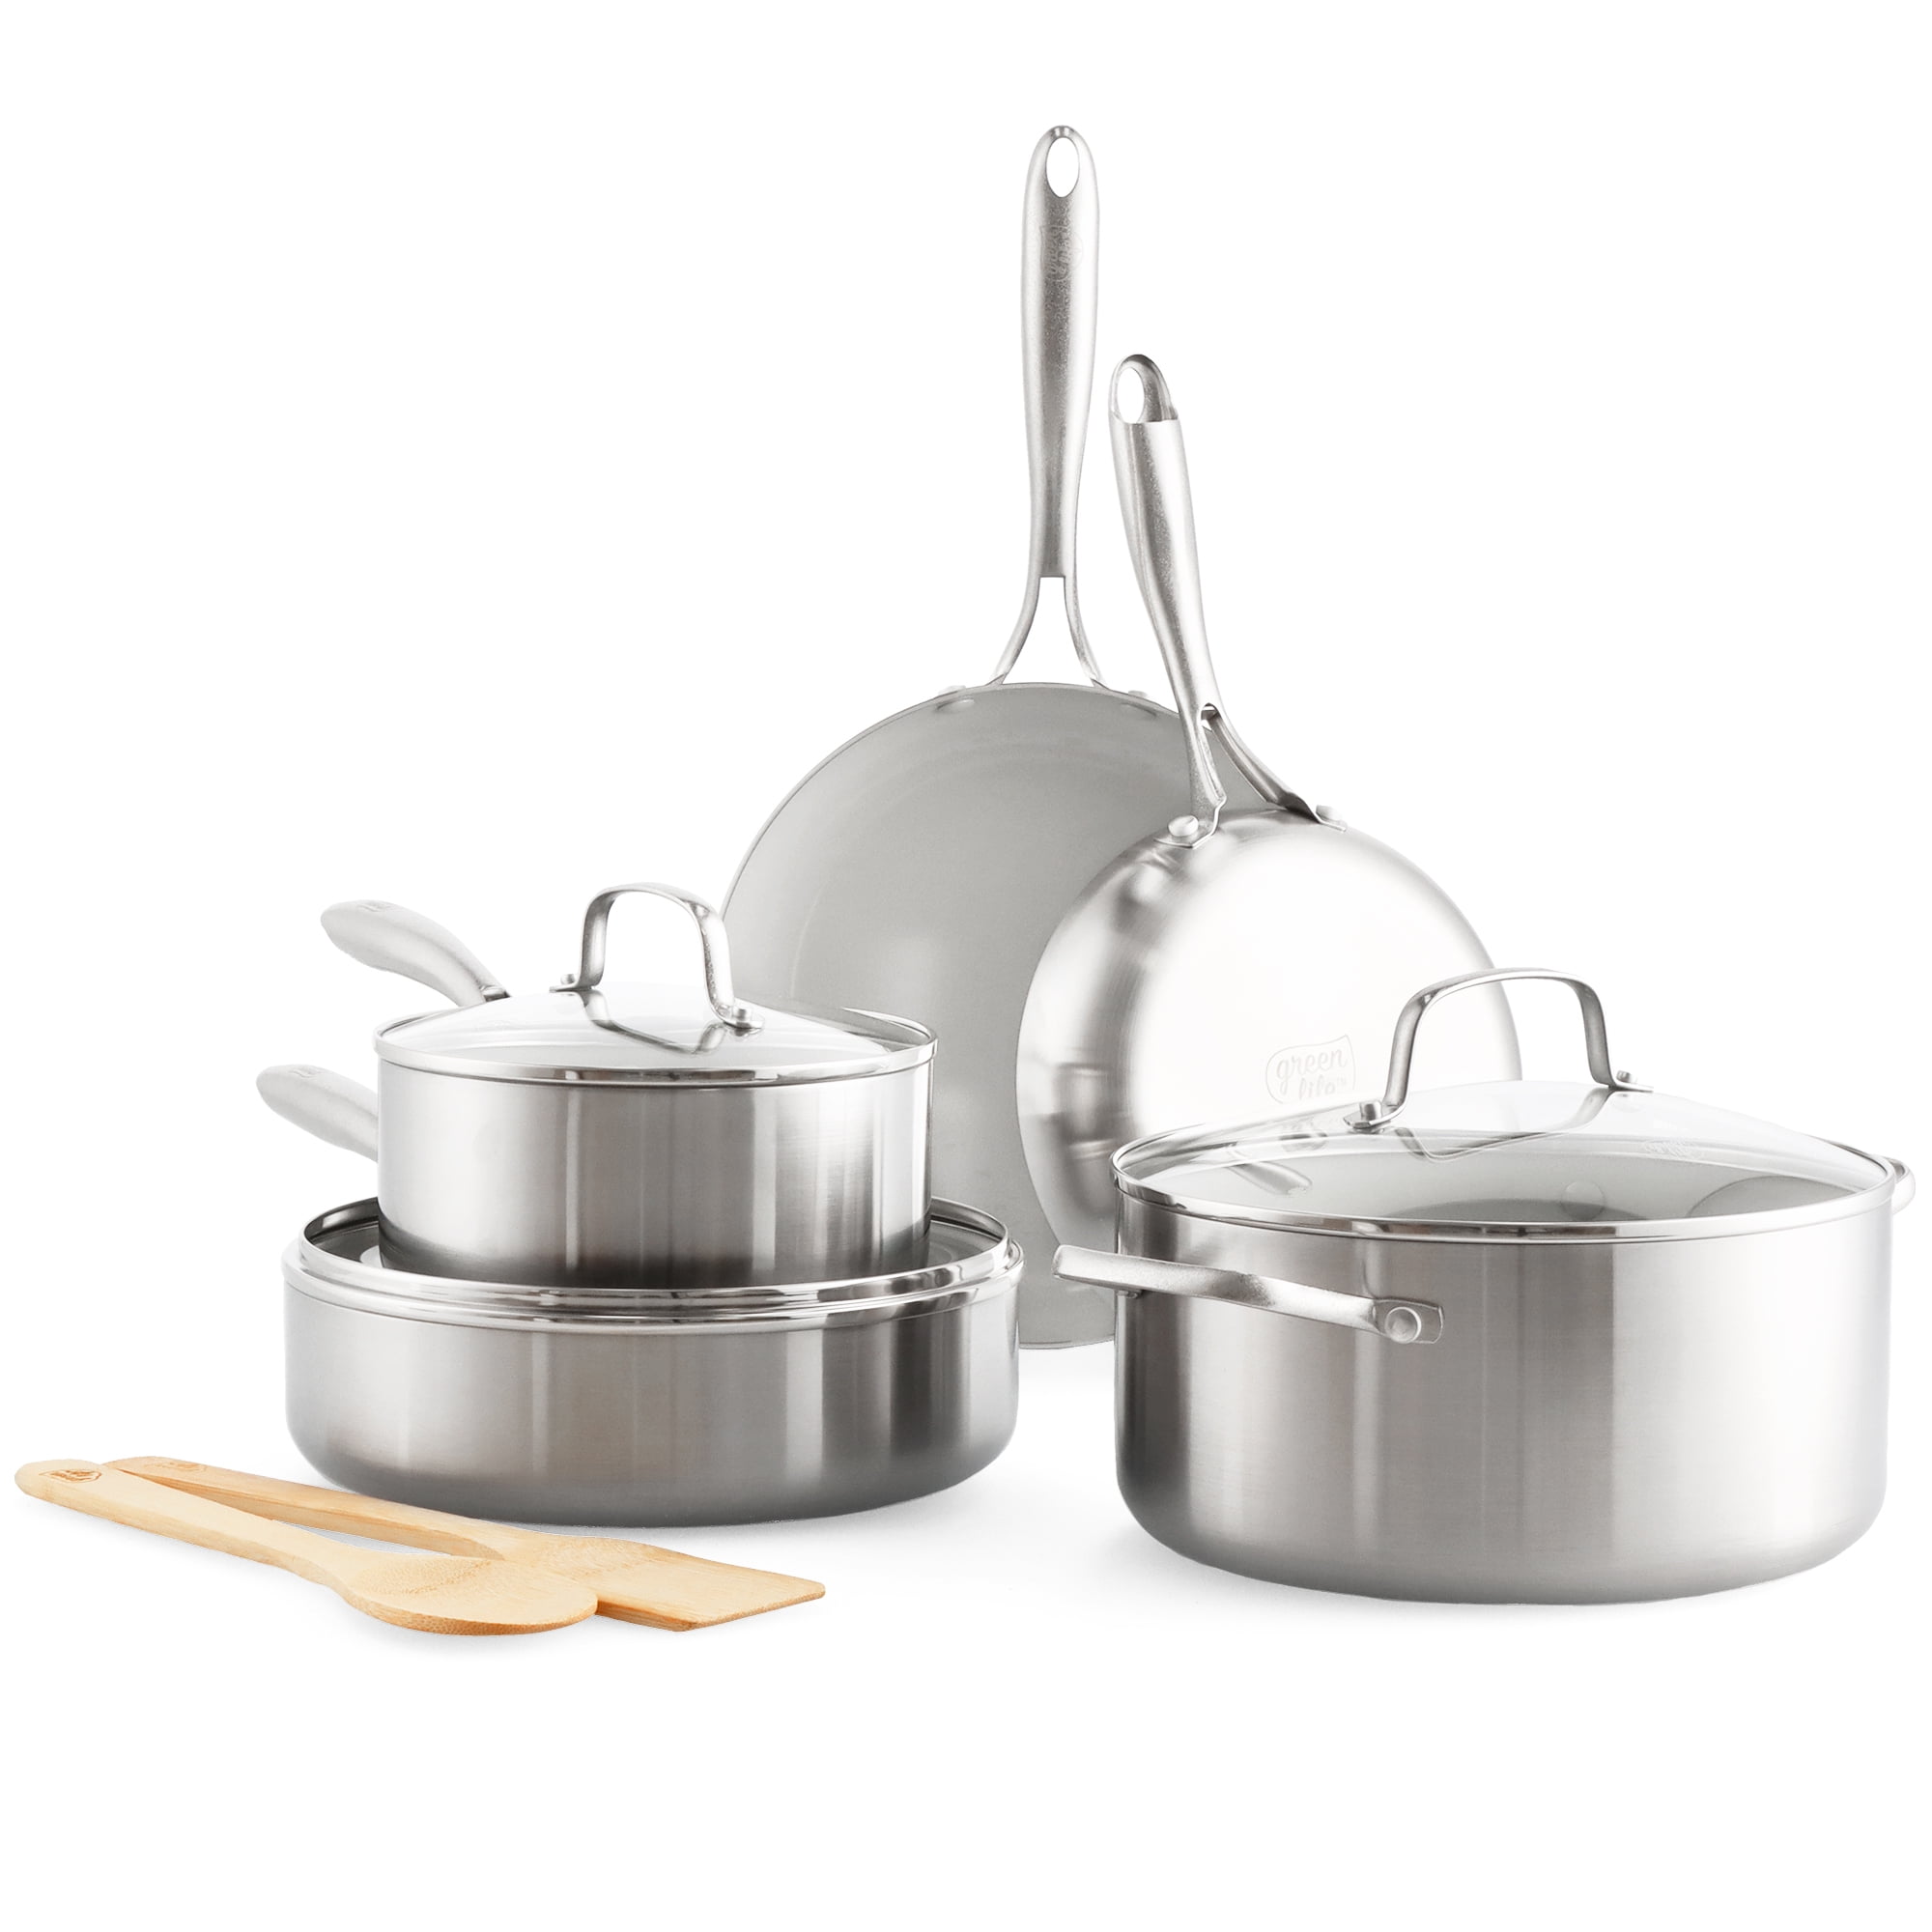 Southern Living by GreenPan Ceramic Nonstick Tri-ply Stainless